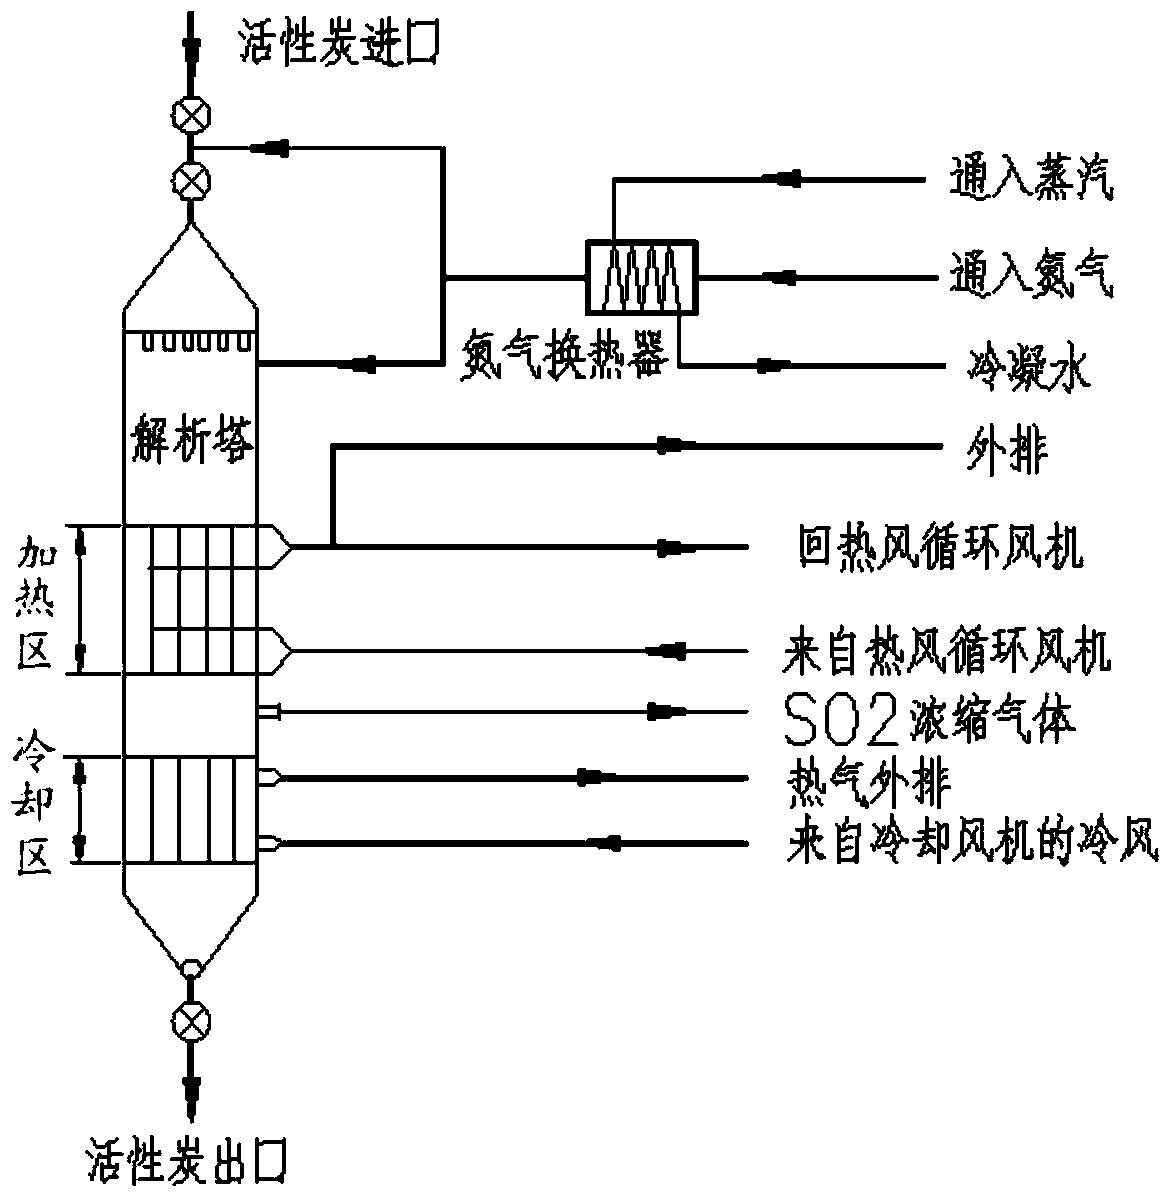 Flue gas desulfurization and denitrification method and device for flue gas temperature control using ammonia-containing wastewater